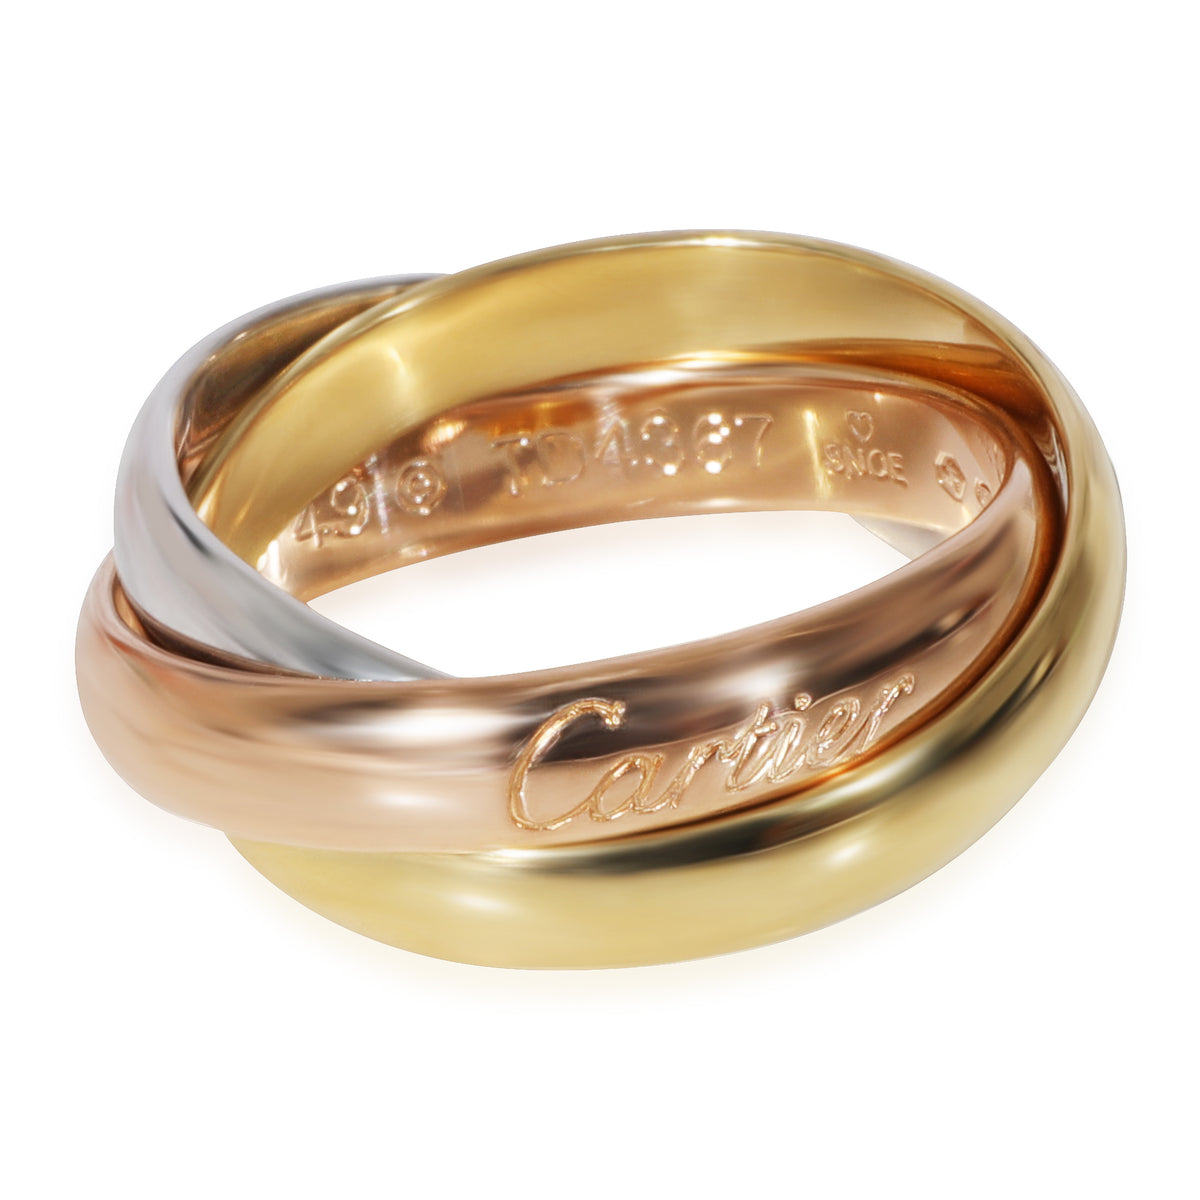 Cartier Trinity  Ring in 18k 3 Tone Gold